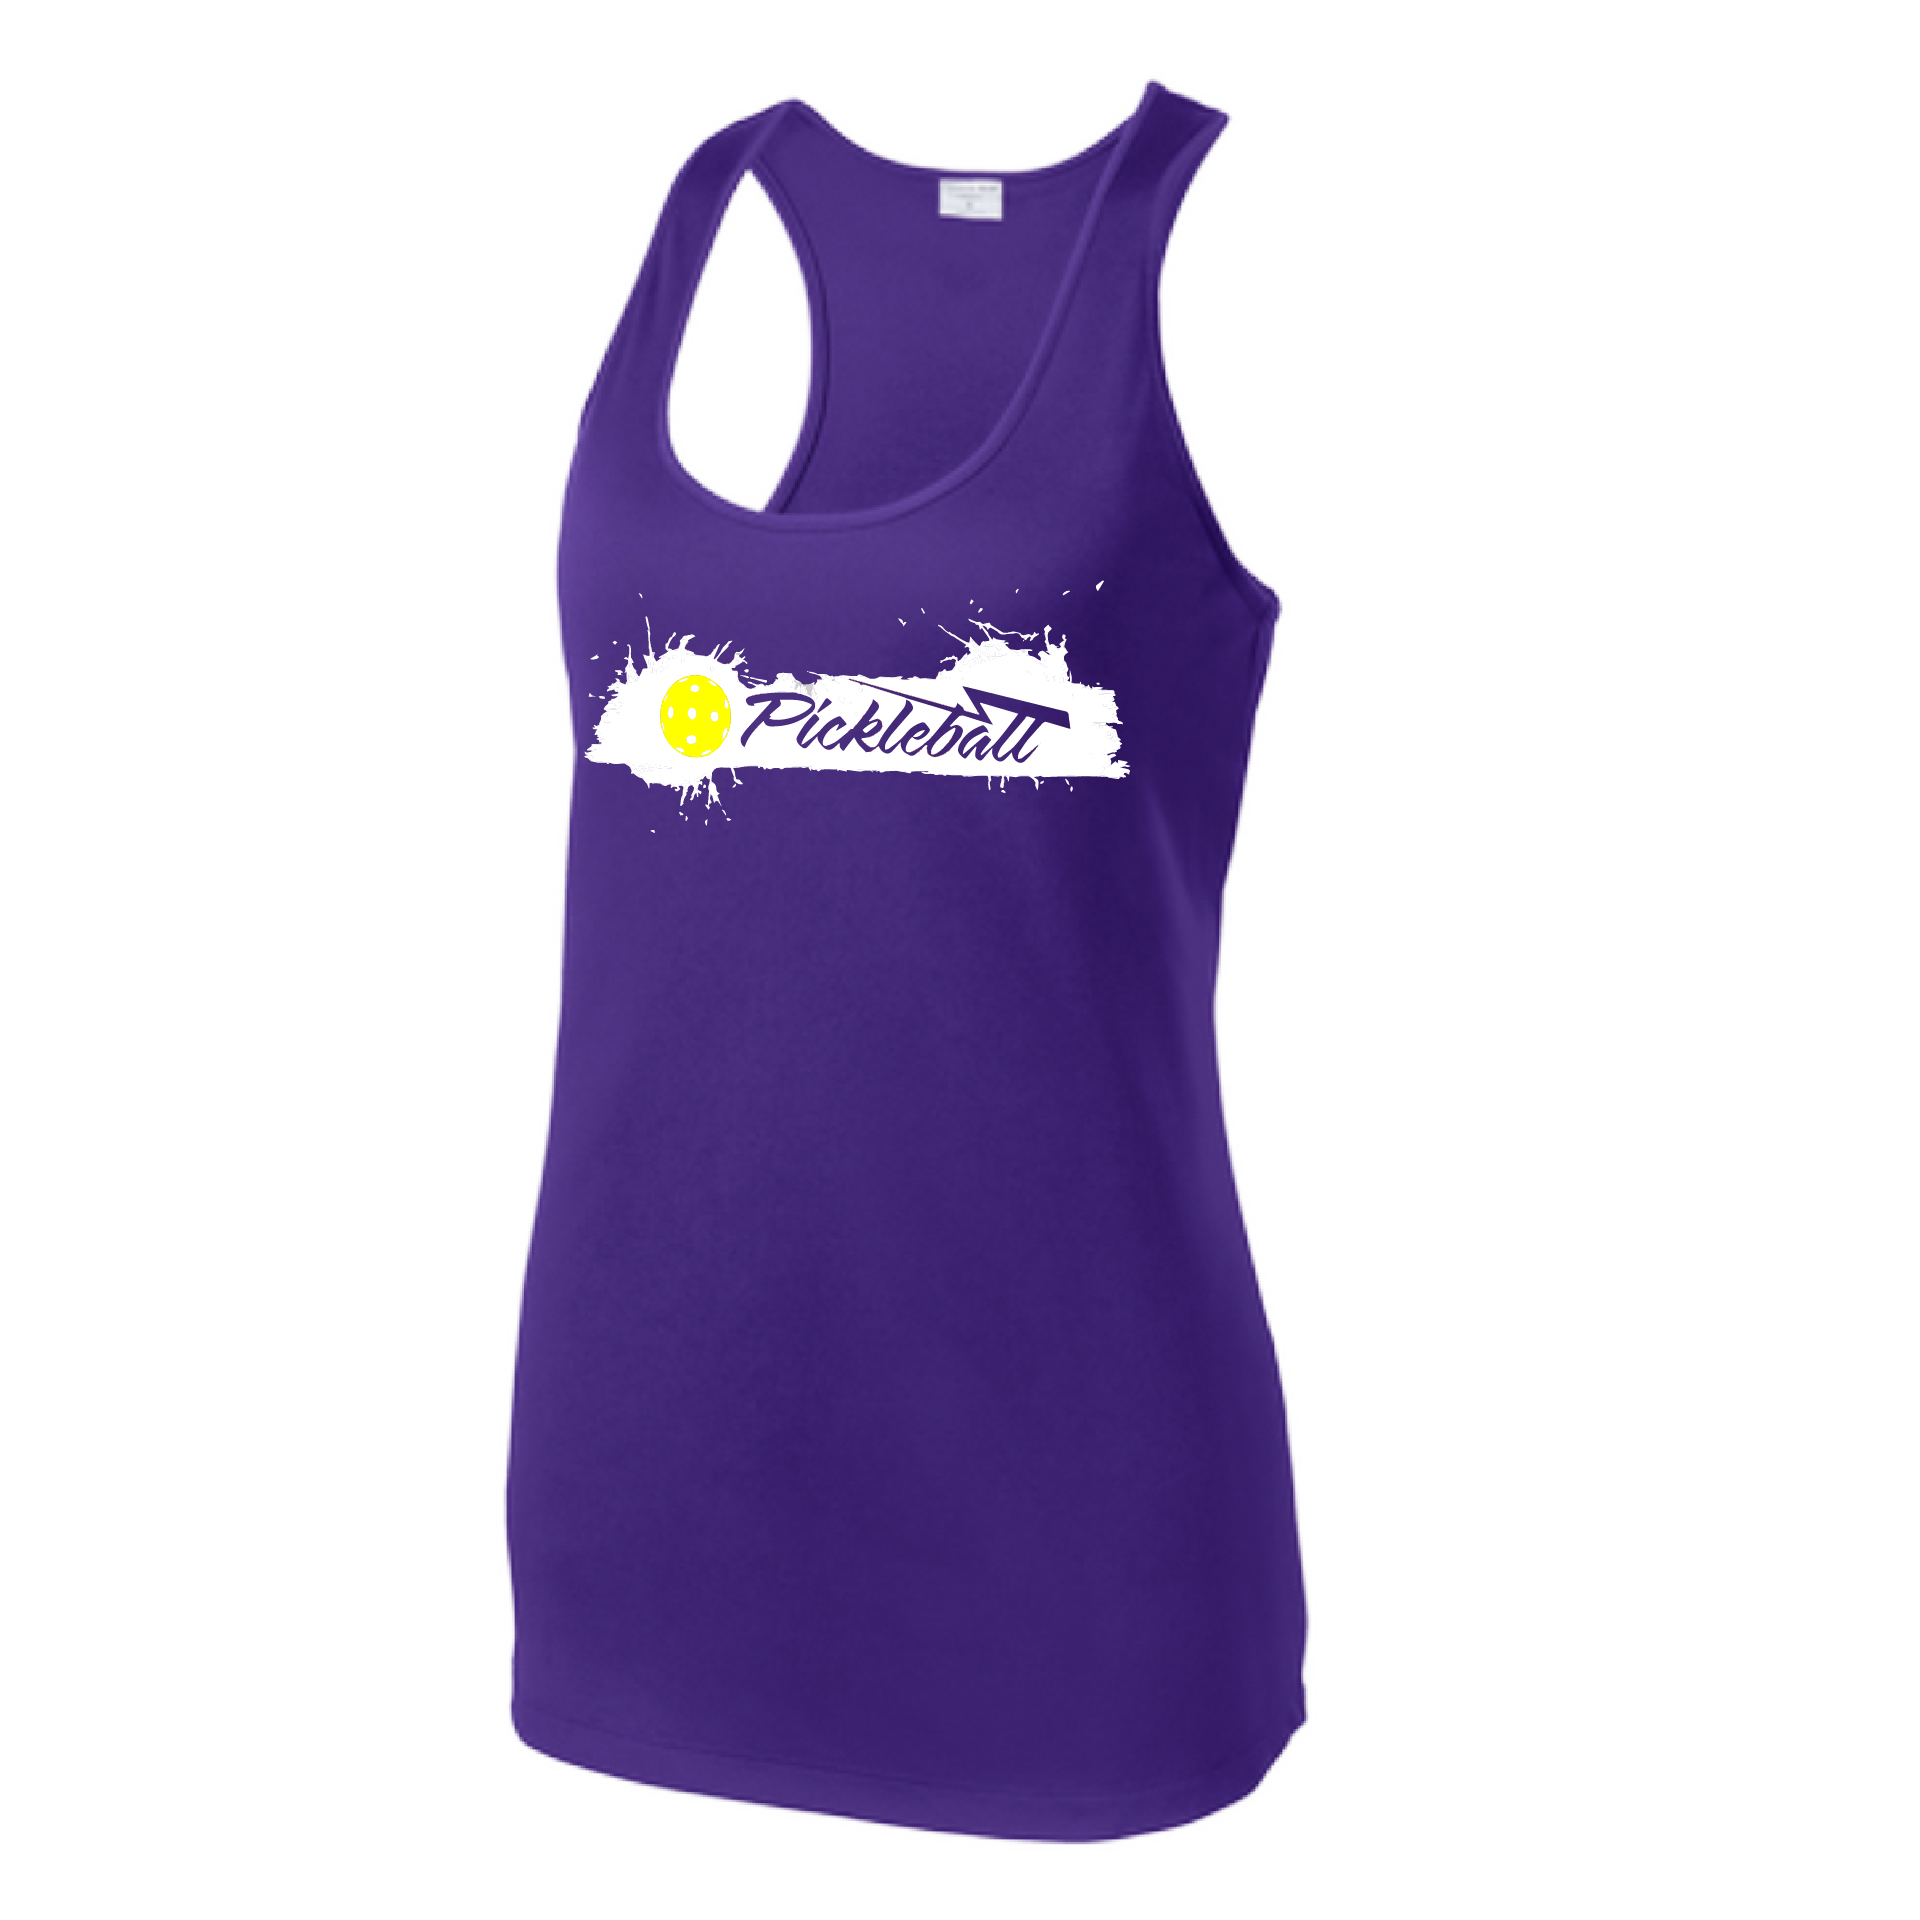 Pickleball Design: Extreme  Women's Style: Racerback Tank  Turn up the volume in this Women's shirt with its perfect mix of softness and attitude. Material is ultra-comfortable with moisture wicking properties and tri-blend softness. PosiCharge technology locks in color. Highly breathable and lightweight.